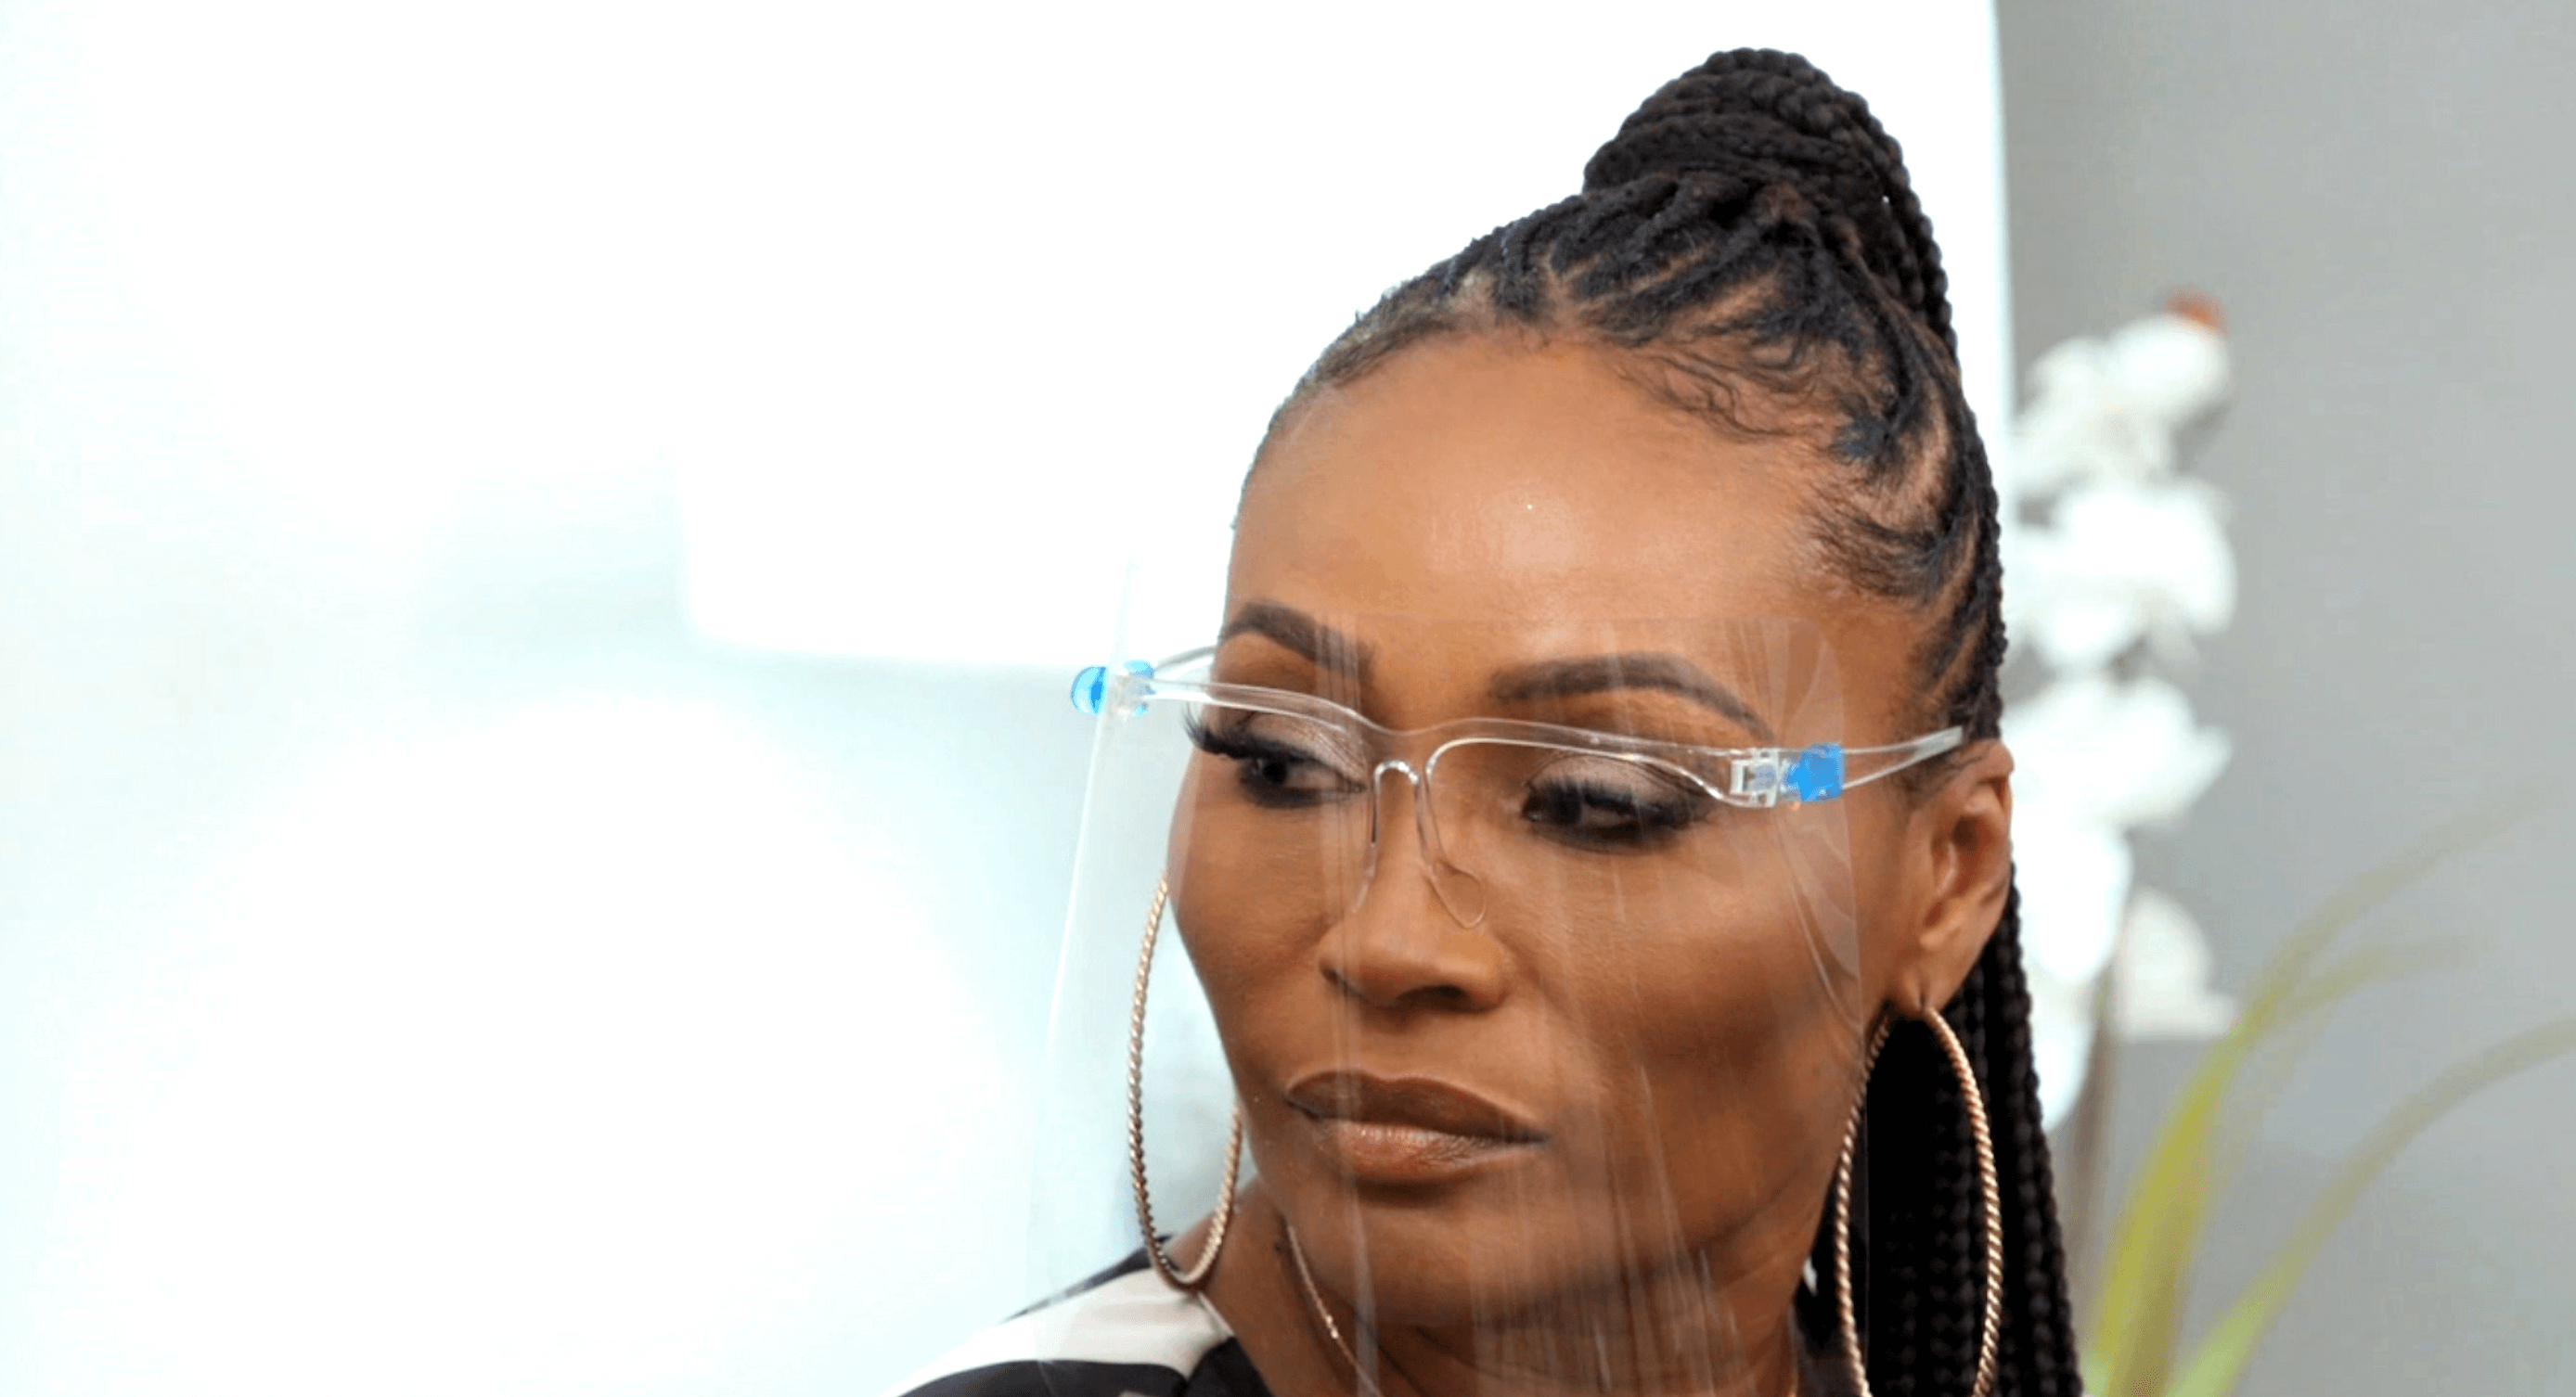 ‘RHOA’ RECAP: Kandi Gives Back & Cynthia Fights With Her Mom About Inviting Her Dad To Her Wedding!